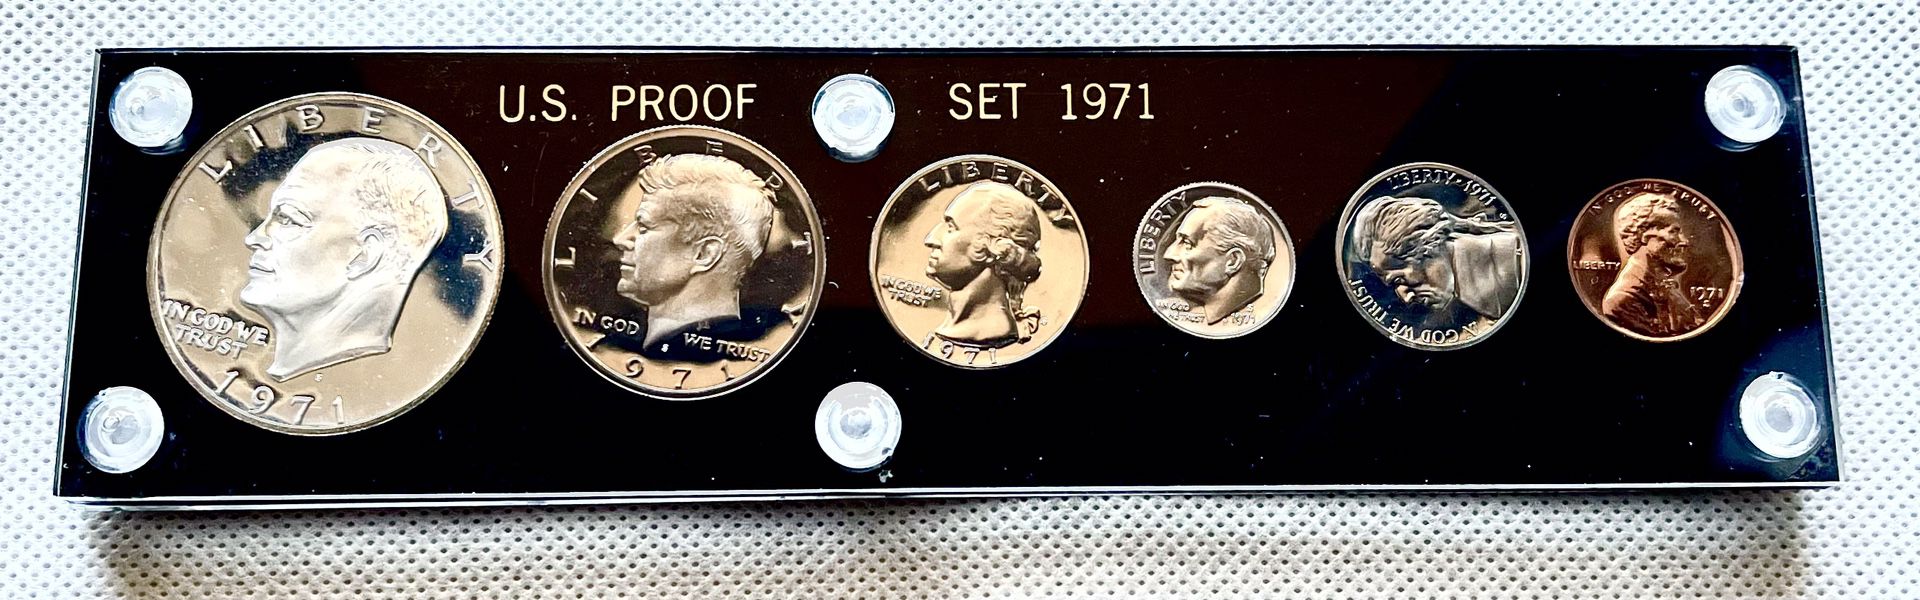 1971 - S.    US Mint Proof Set, Brilliant Uncirculated In New Vintage Capital Holder, Free Display Stand.